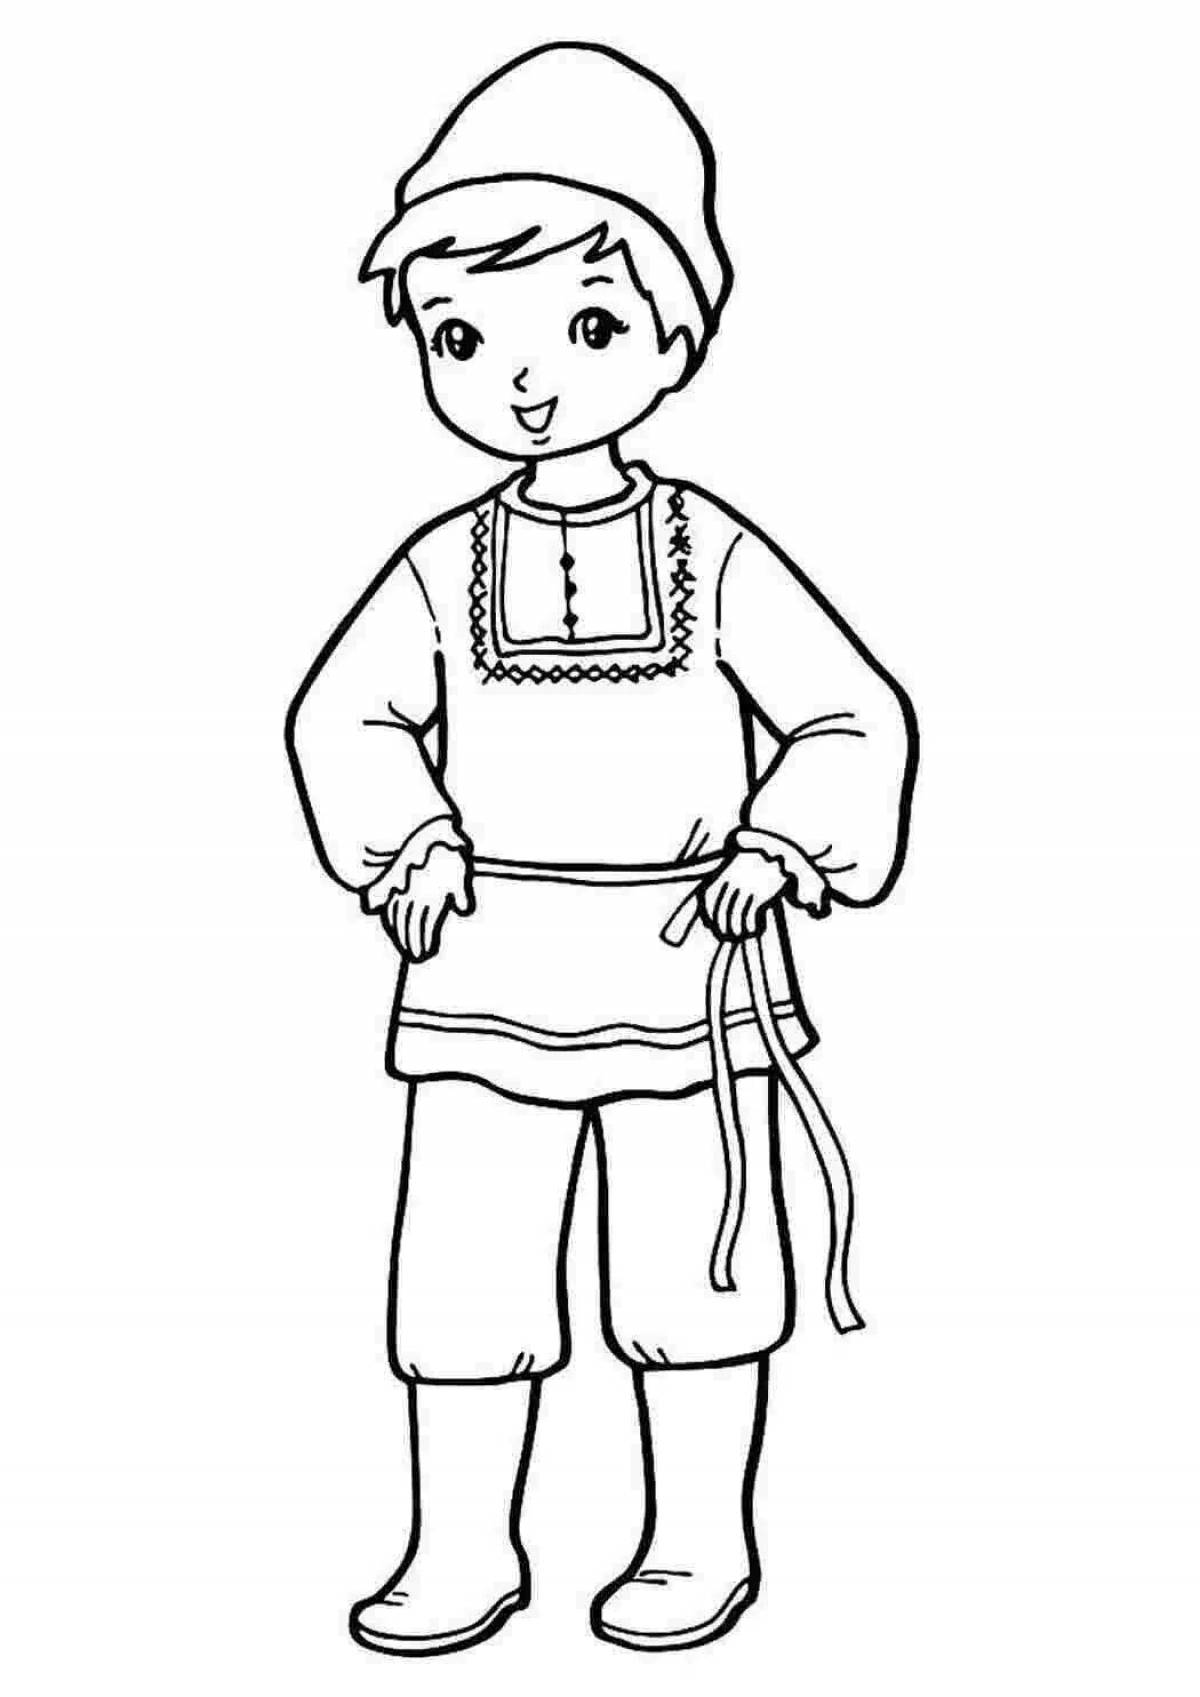 Radiant Ivan the Fool coloring page